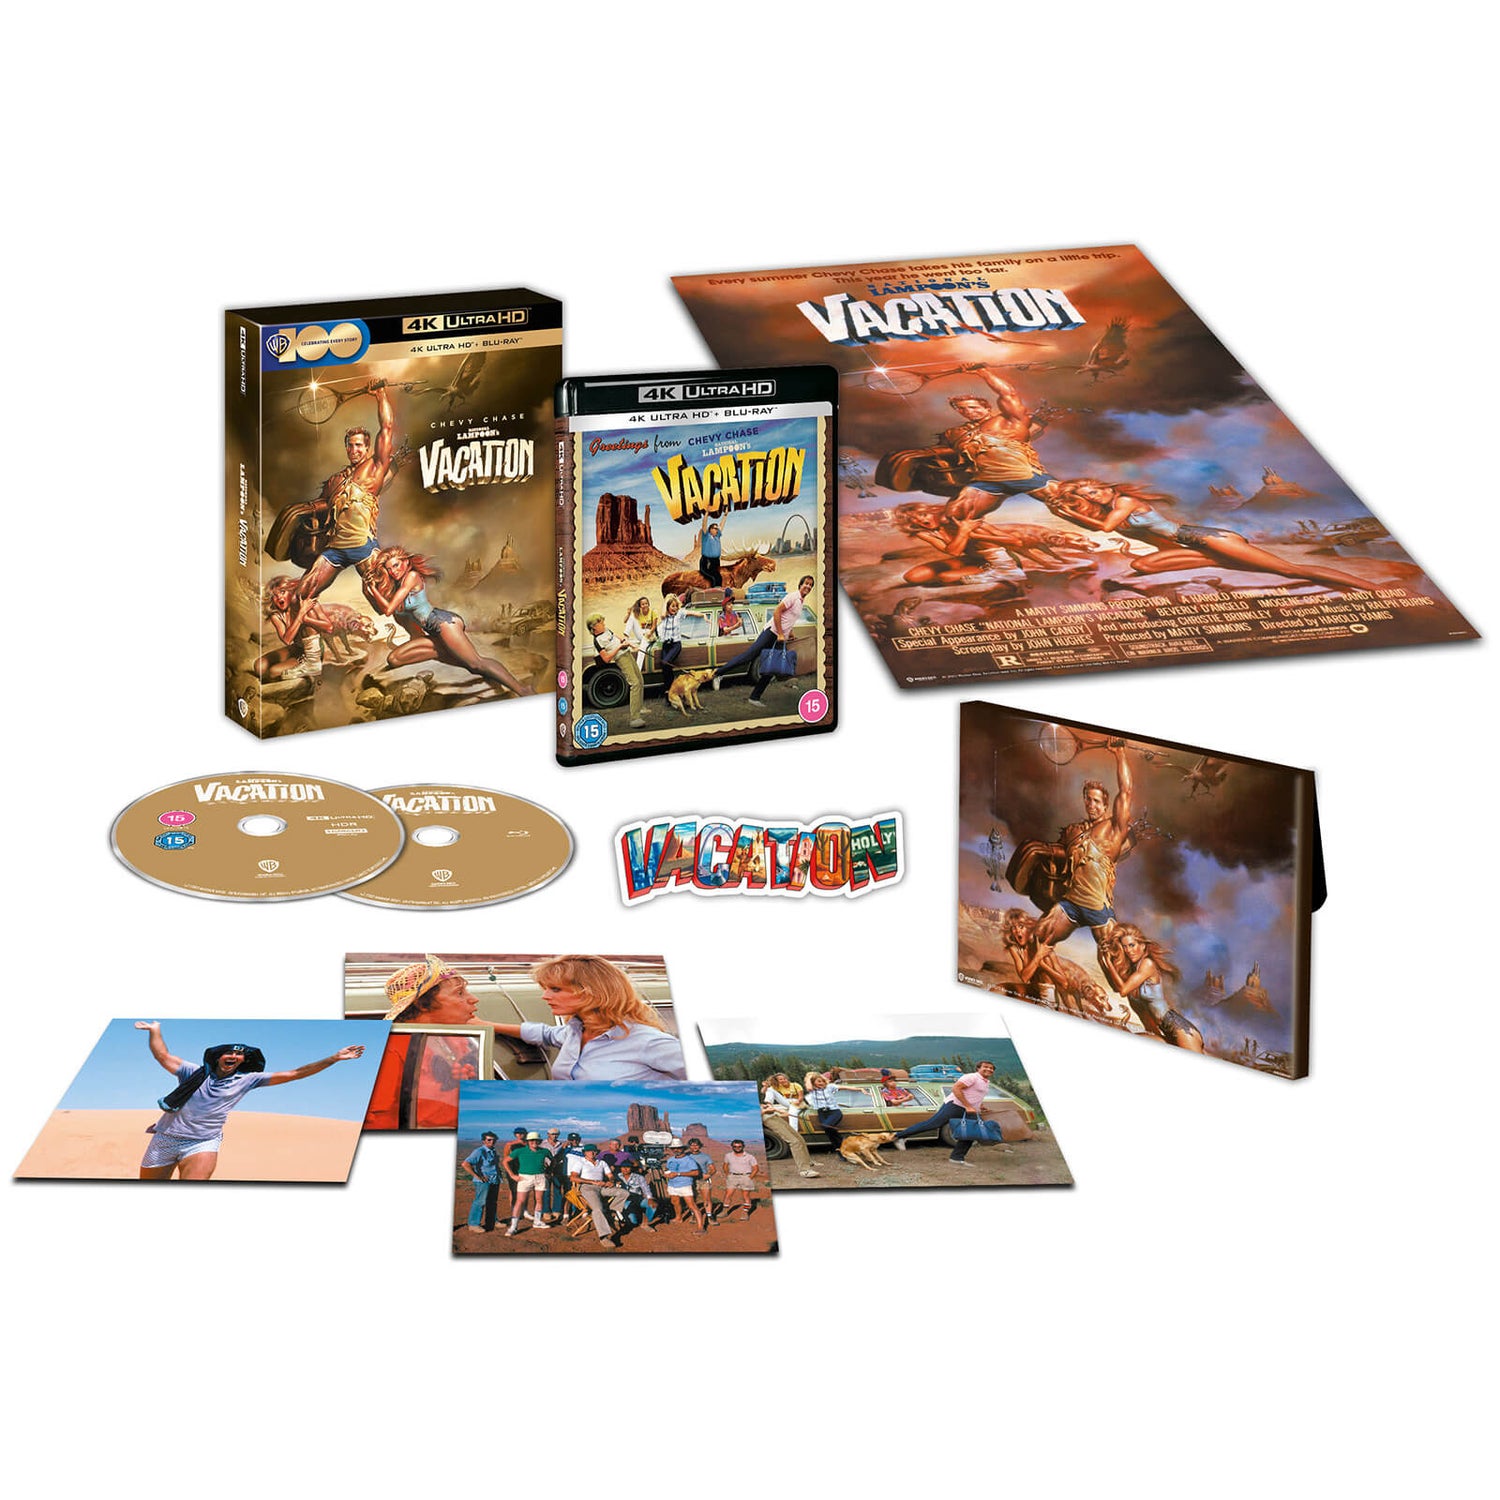 National Lampoon's Vacation Ultimate Collector's Edition 4K Ultra HD